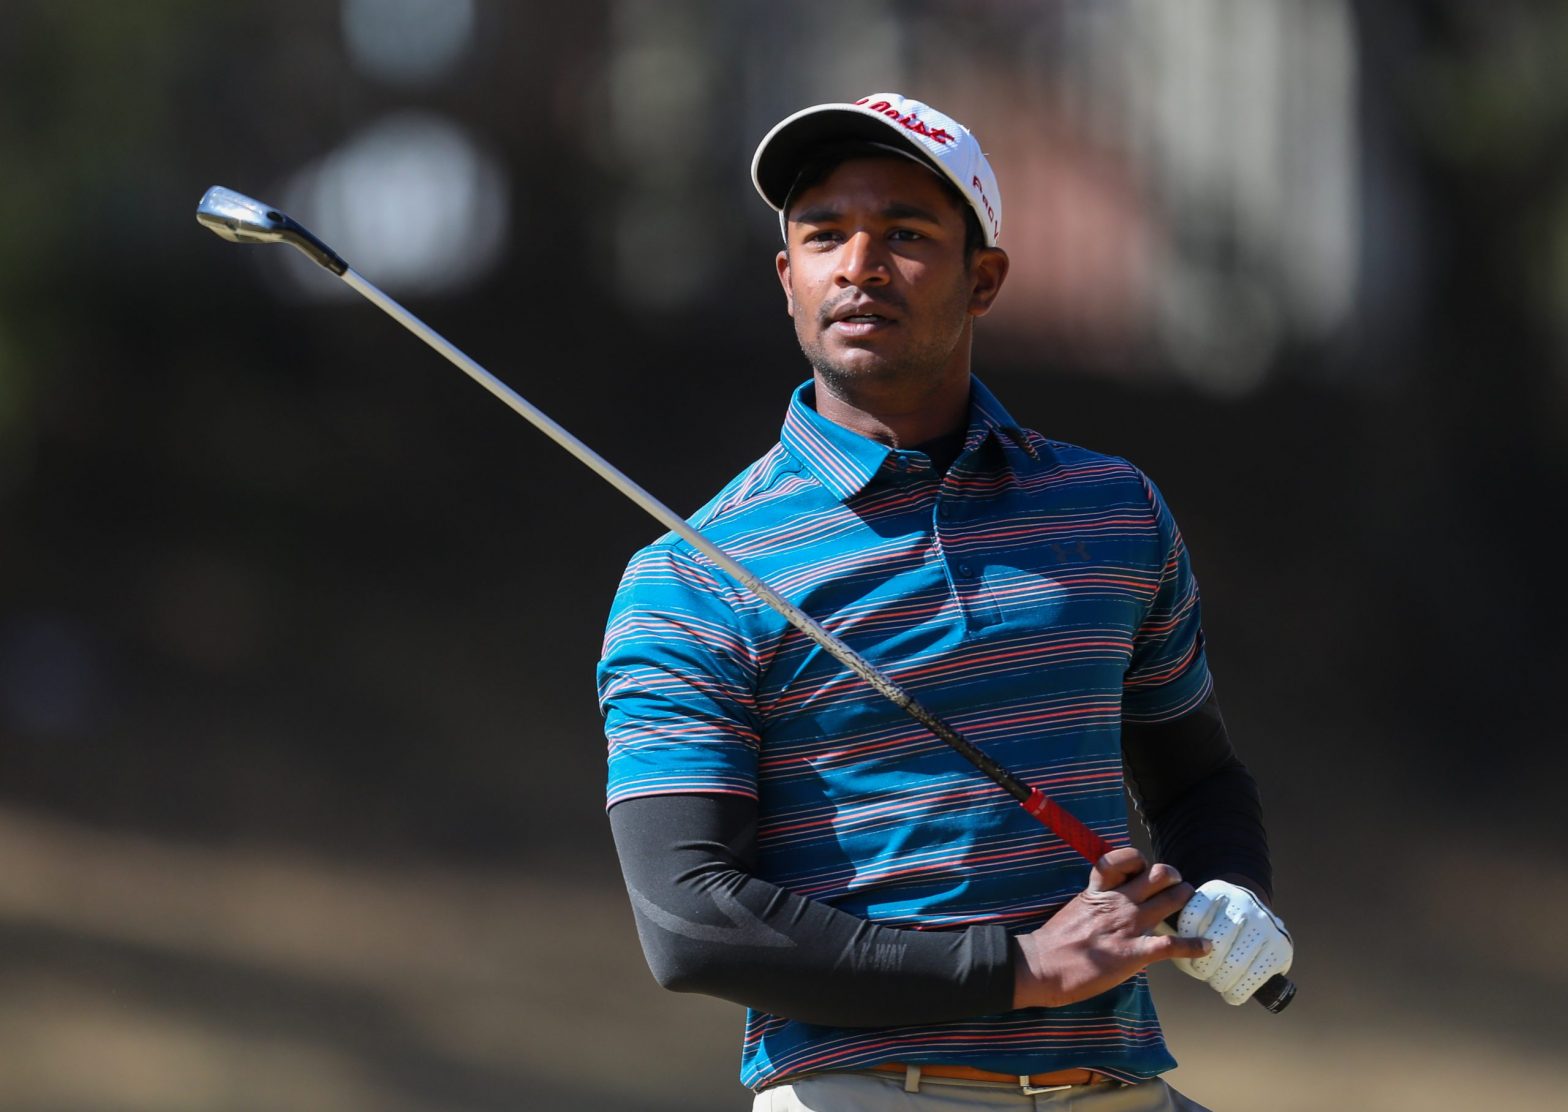 Naidoo has new focus after securing Mackenzie Tour card in US